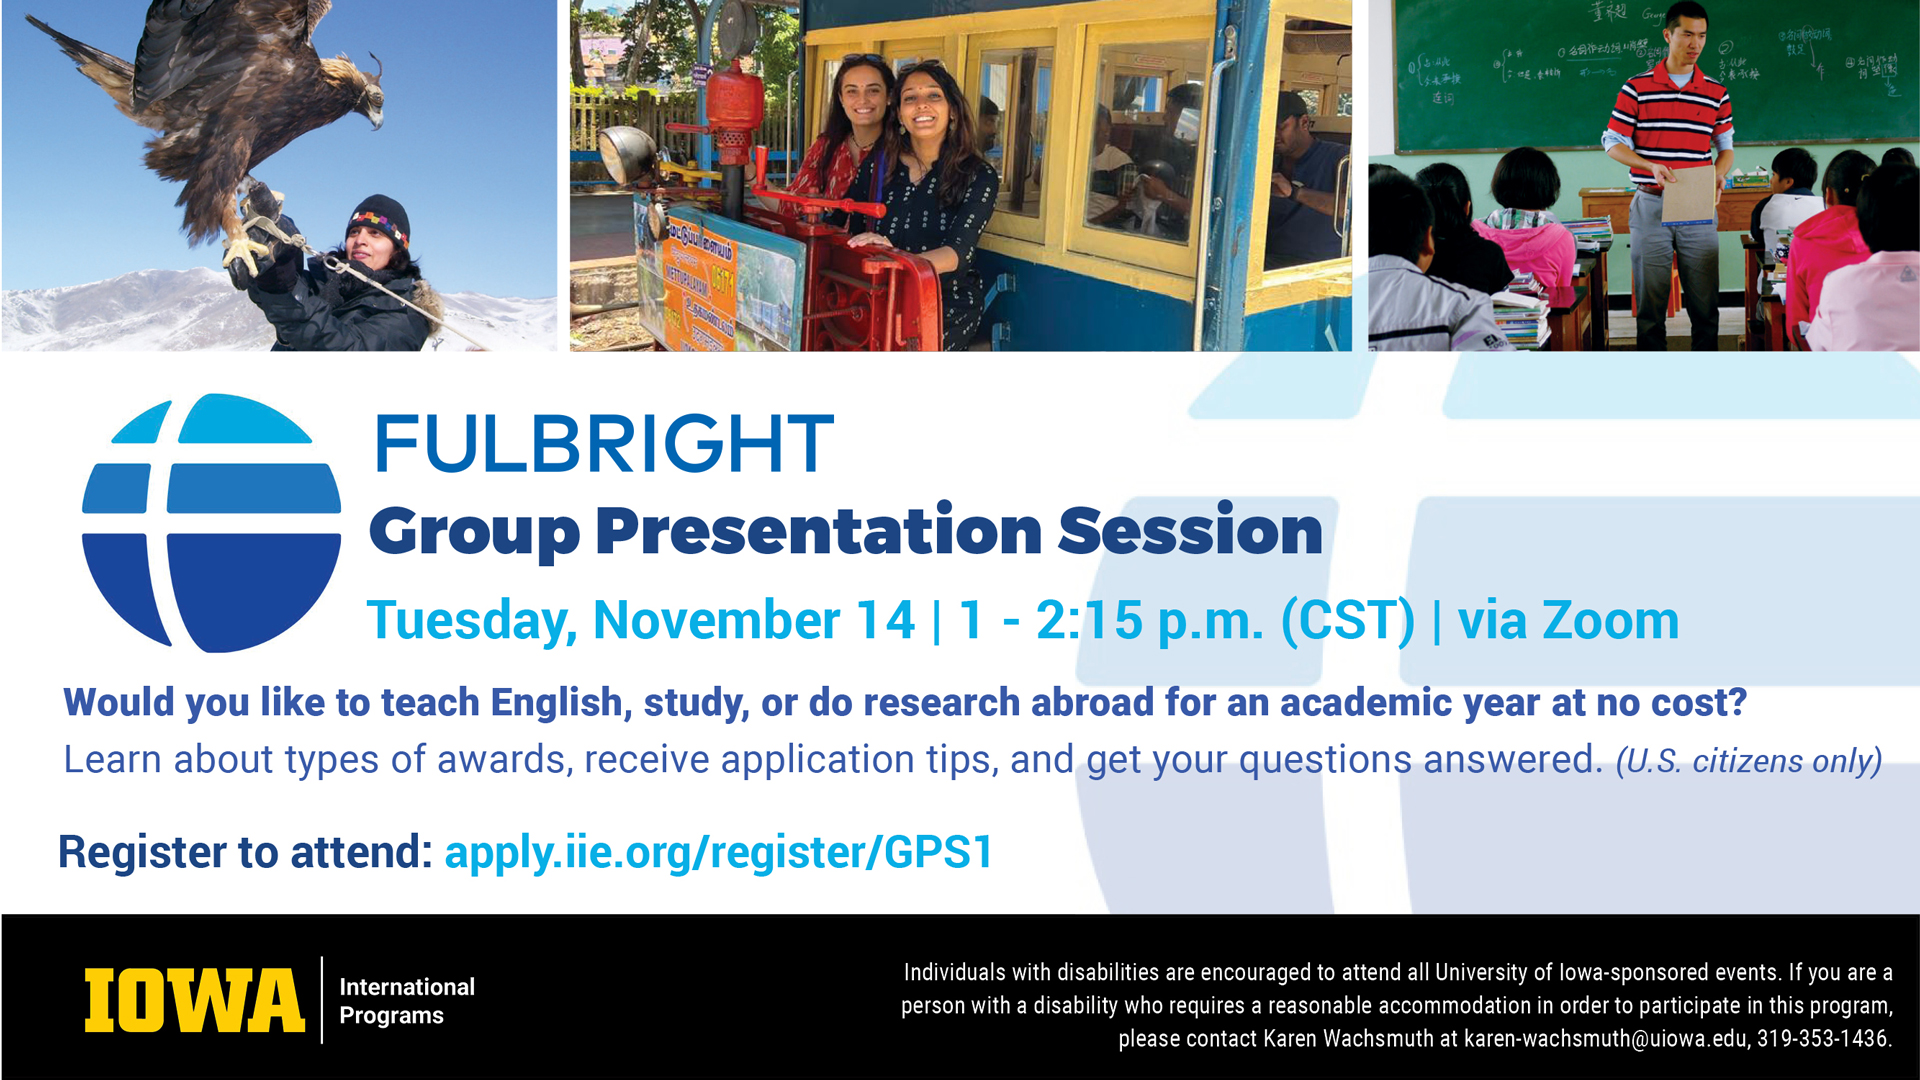 fullbright group presentation session tuesday november 14th, 1-2:15PM